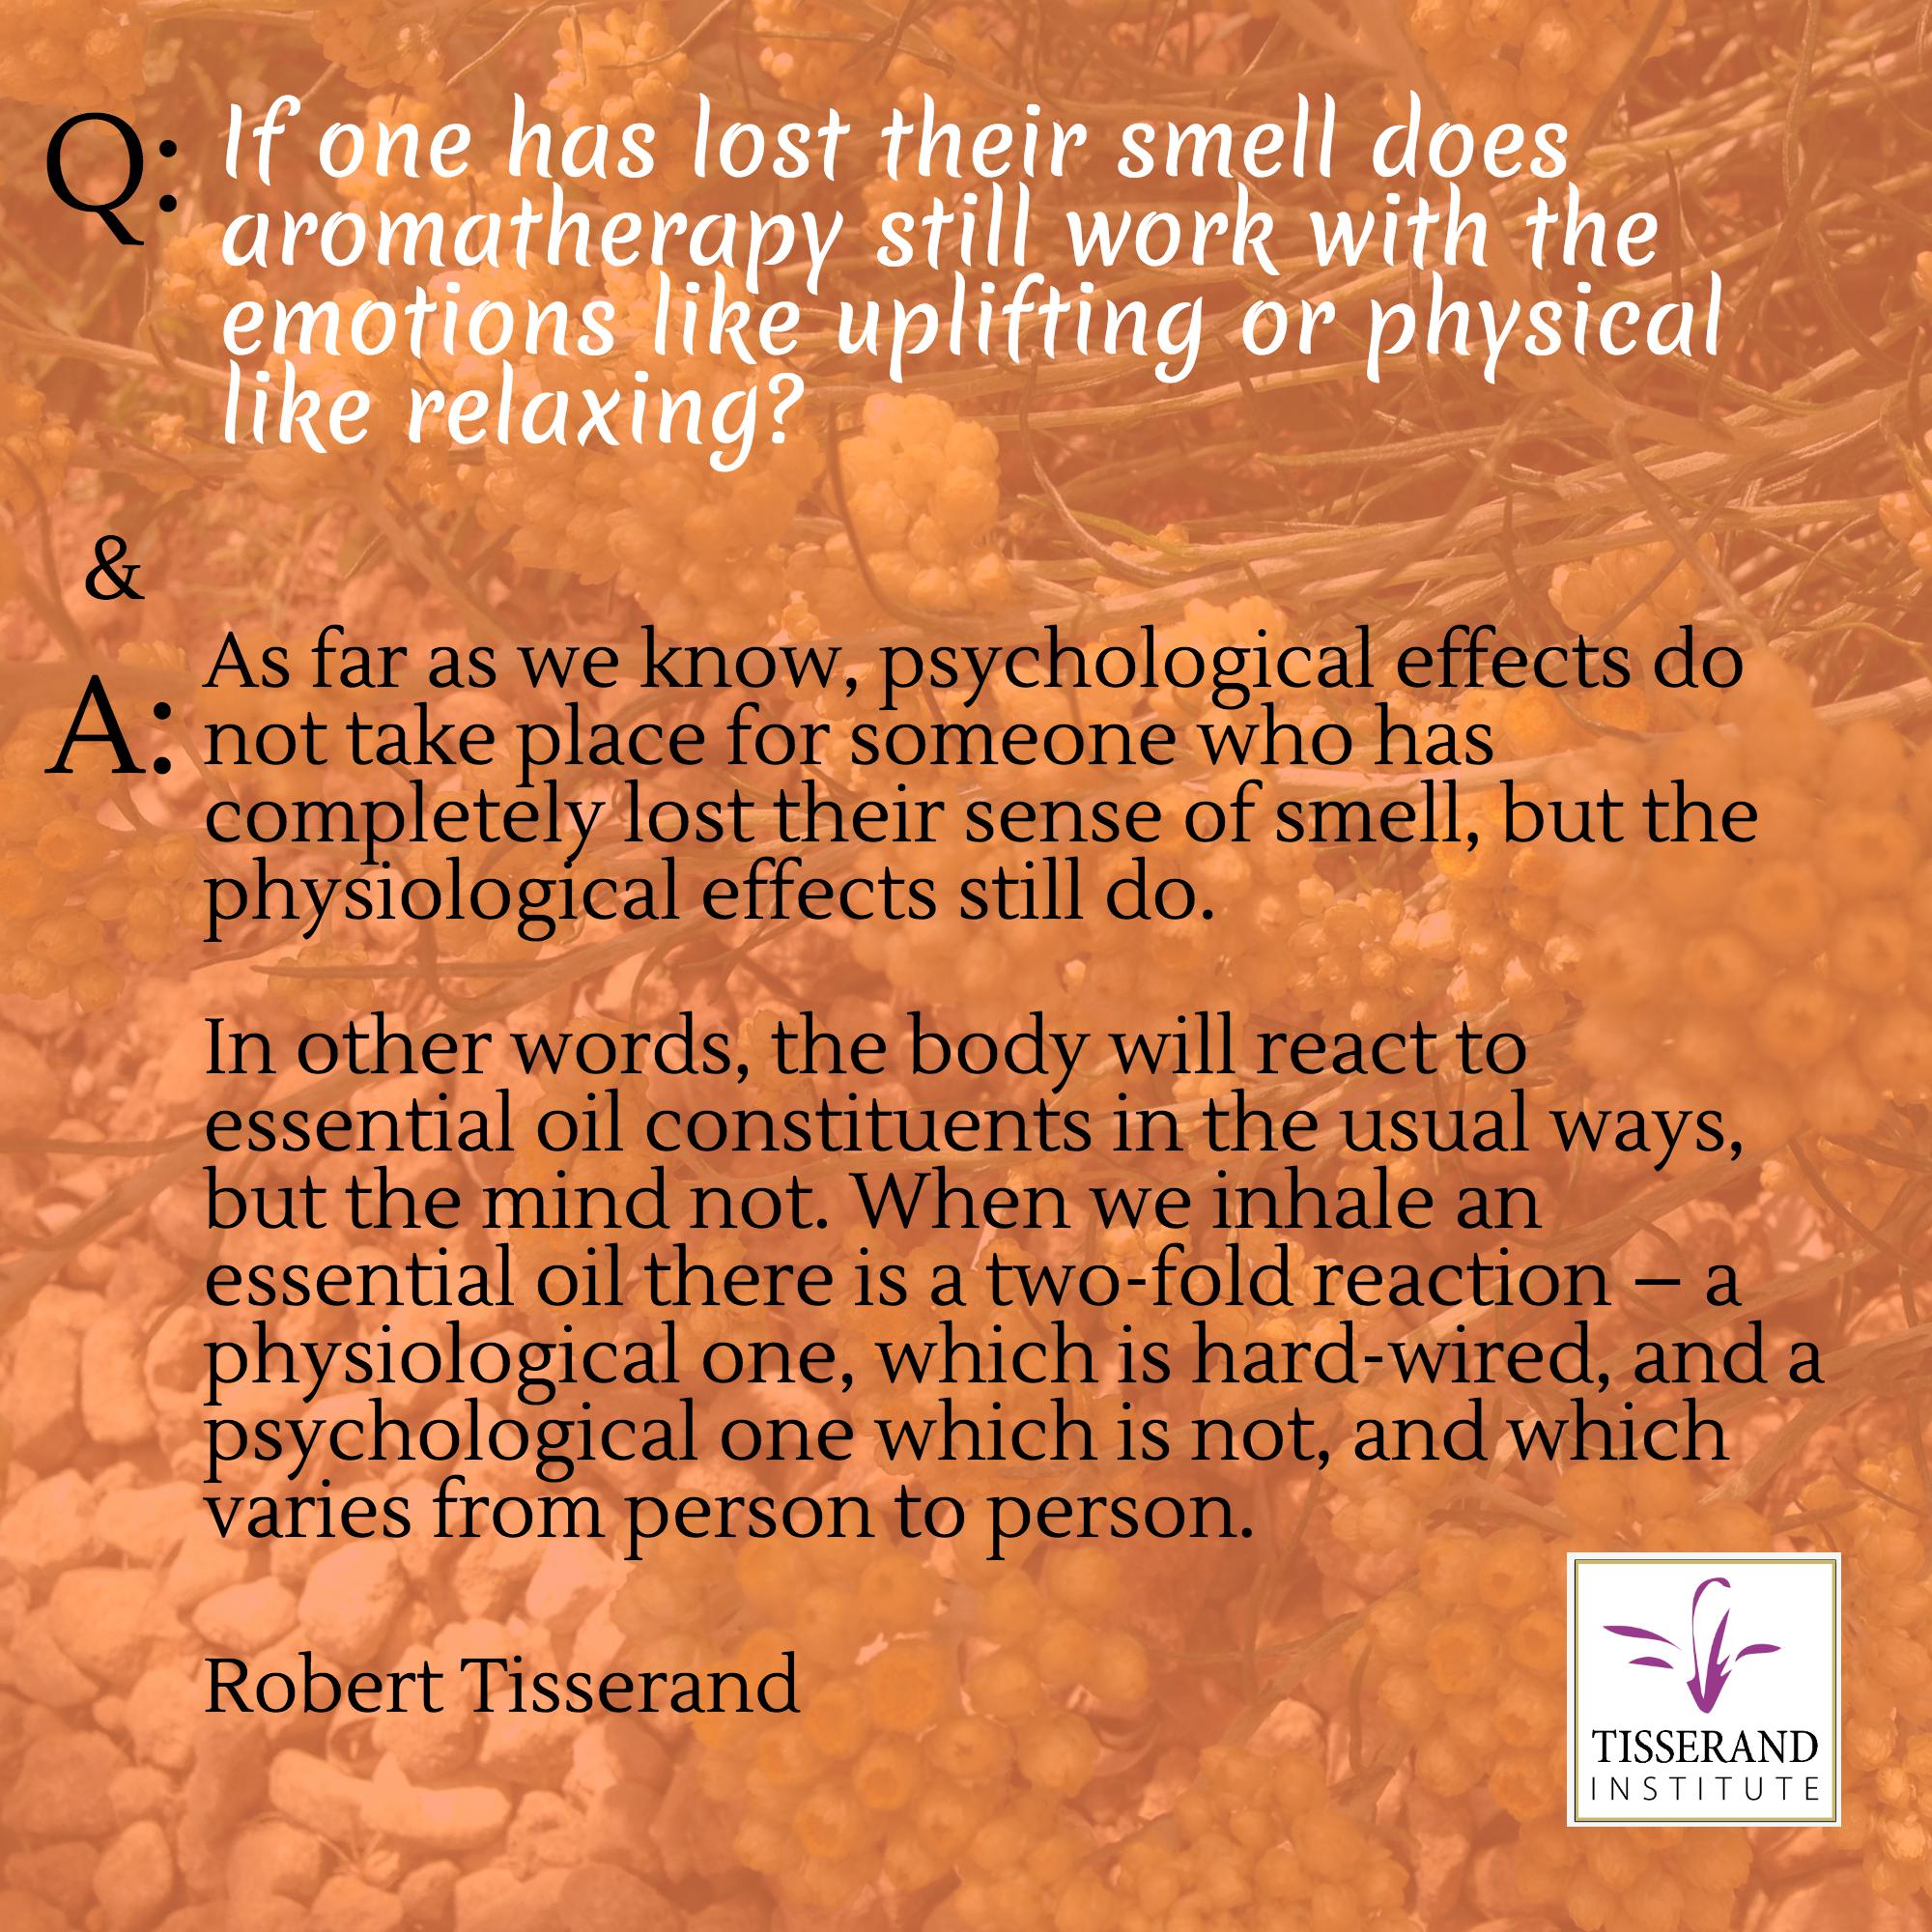 tisserand institute infographic if one has lost their smell aromatherapy